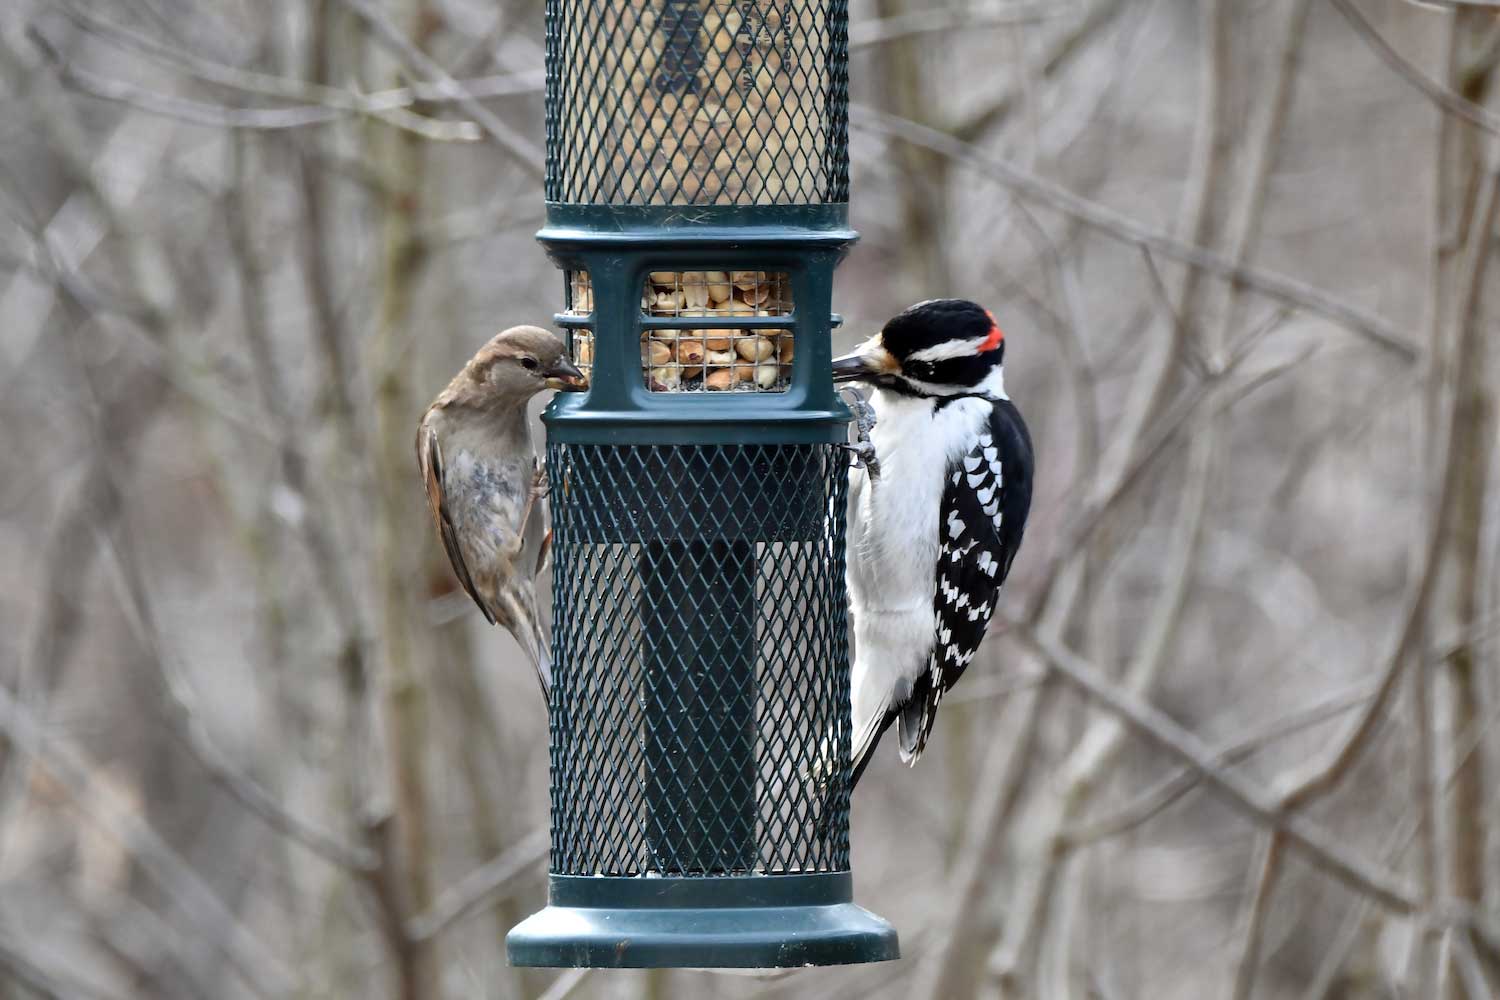 Two birds eating from a bird feeder.